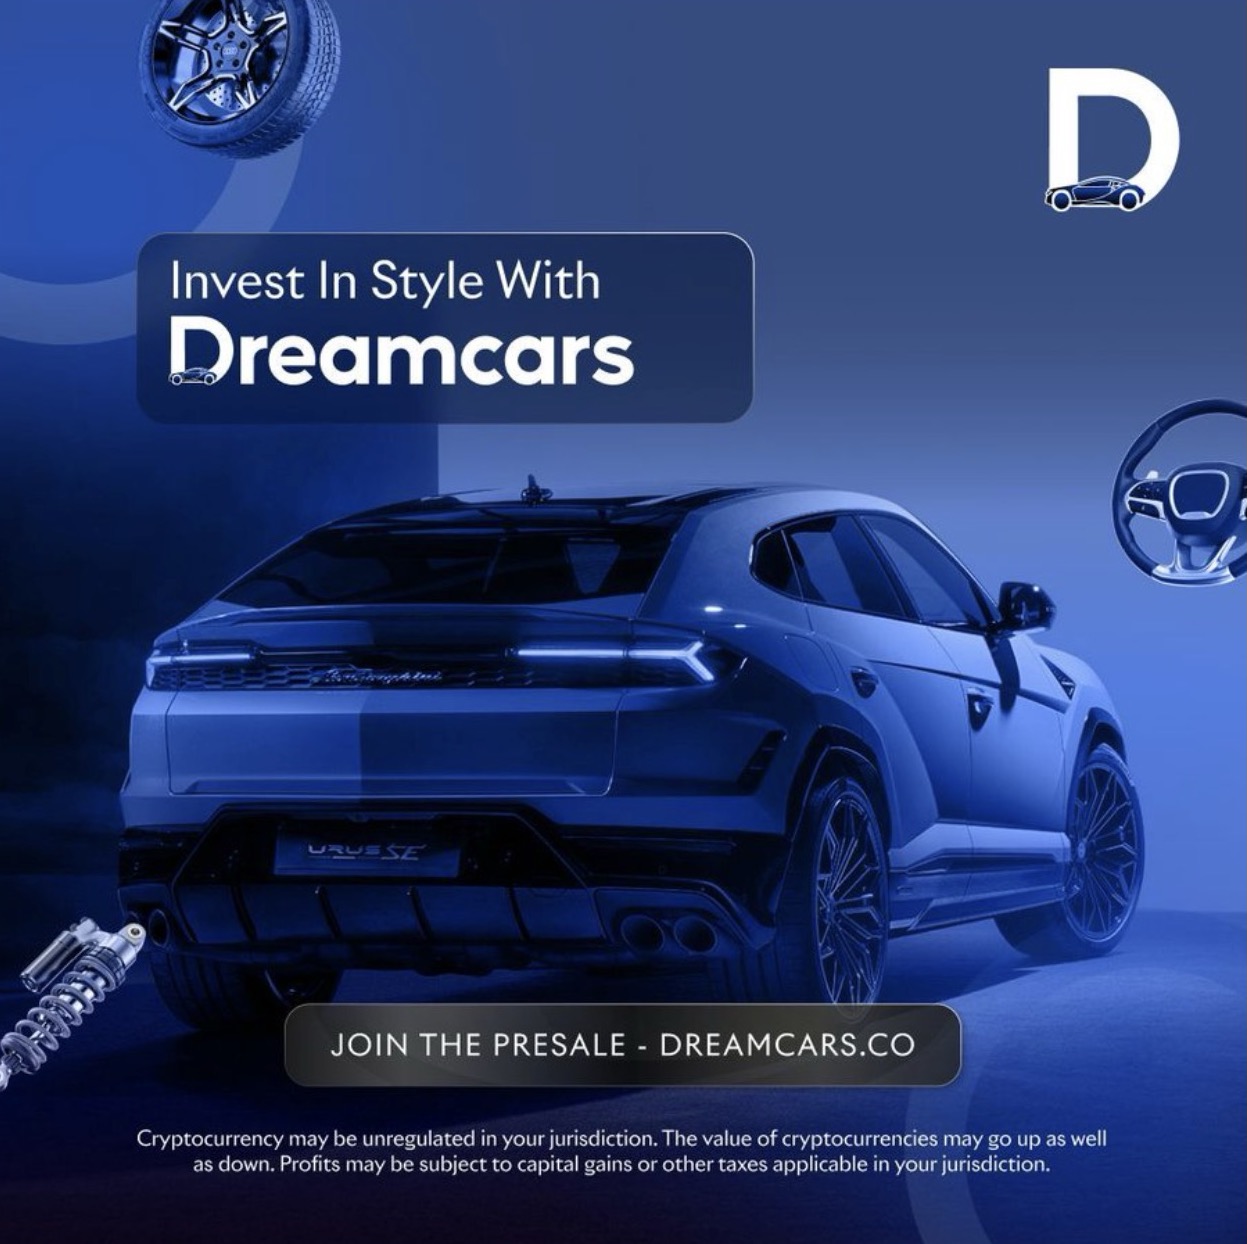 Invest in Style with Dreamcars